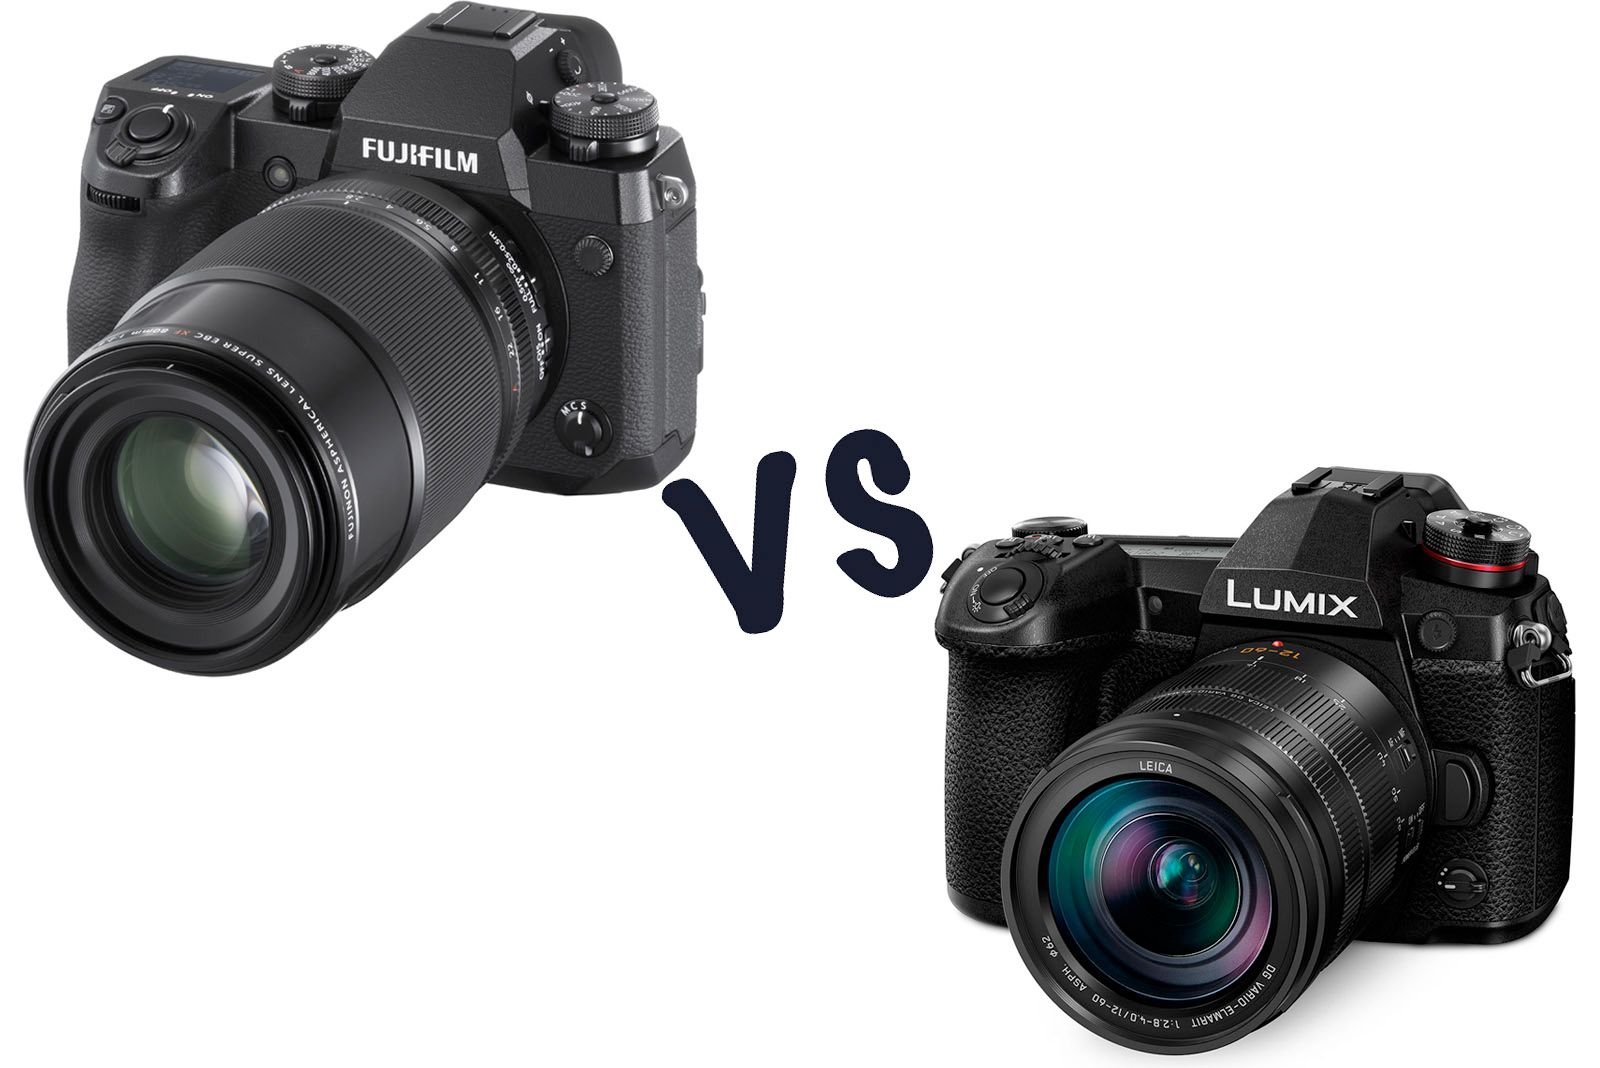 Fujifilm X-H1 vs Panasonic G9 What’s the difference image 1